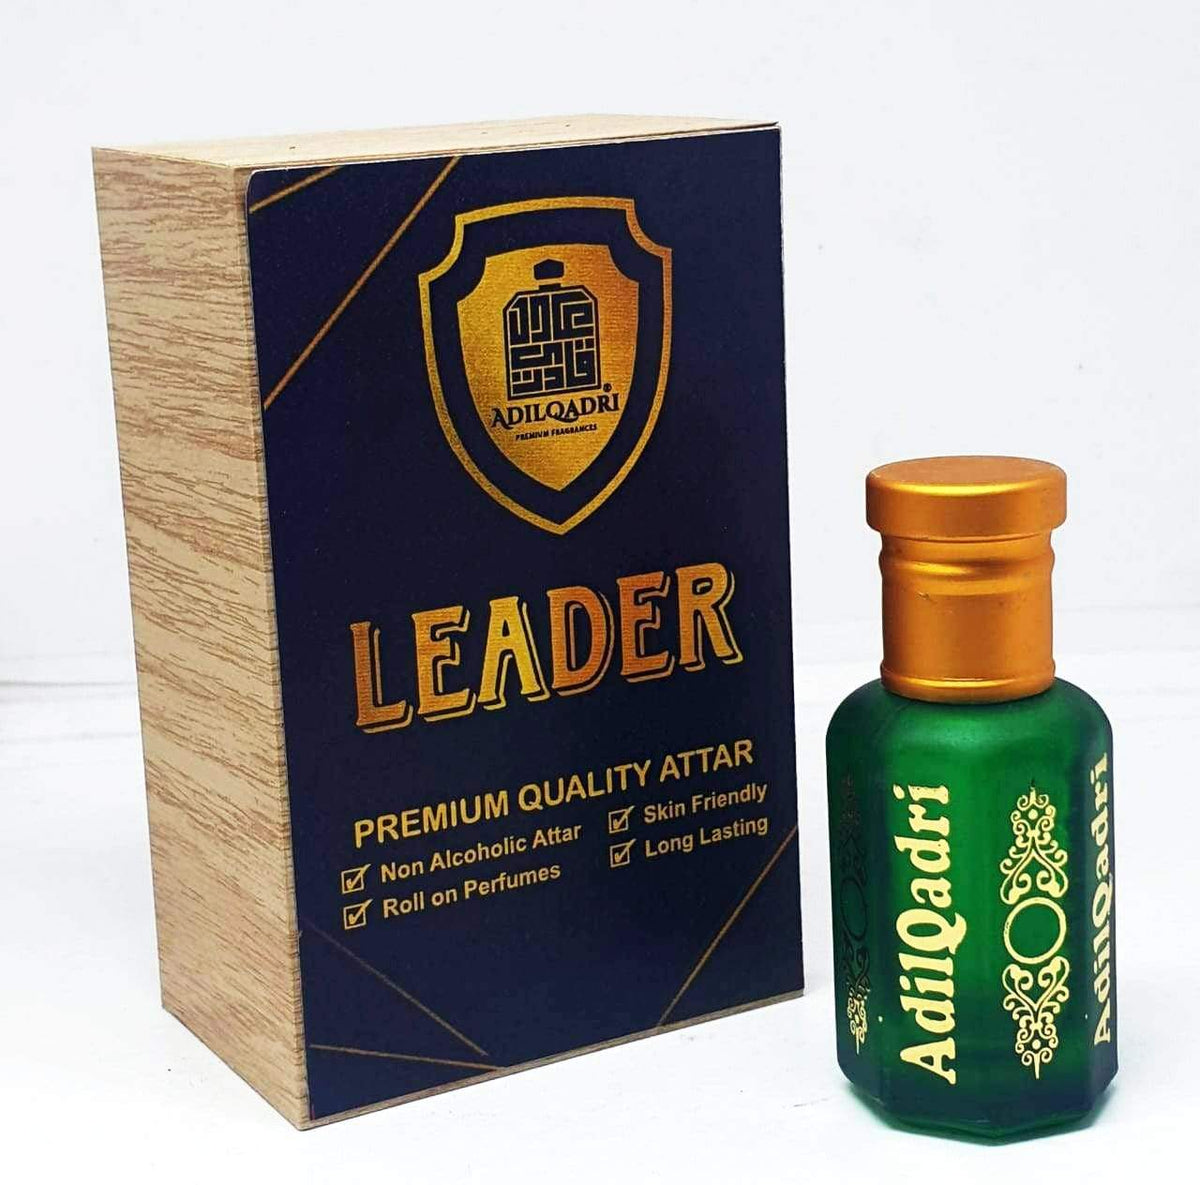 AdilQadri Leader Spicy Premium Quality 10 ML Attar (French Spicy Perfume) With Attractive Wooden Box